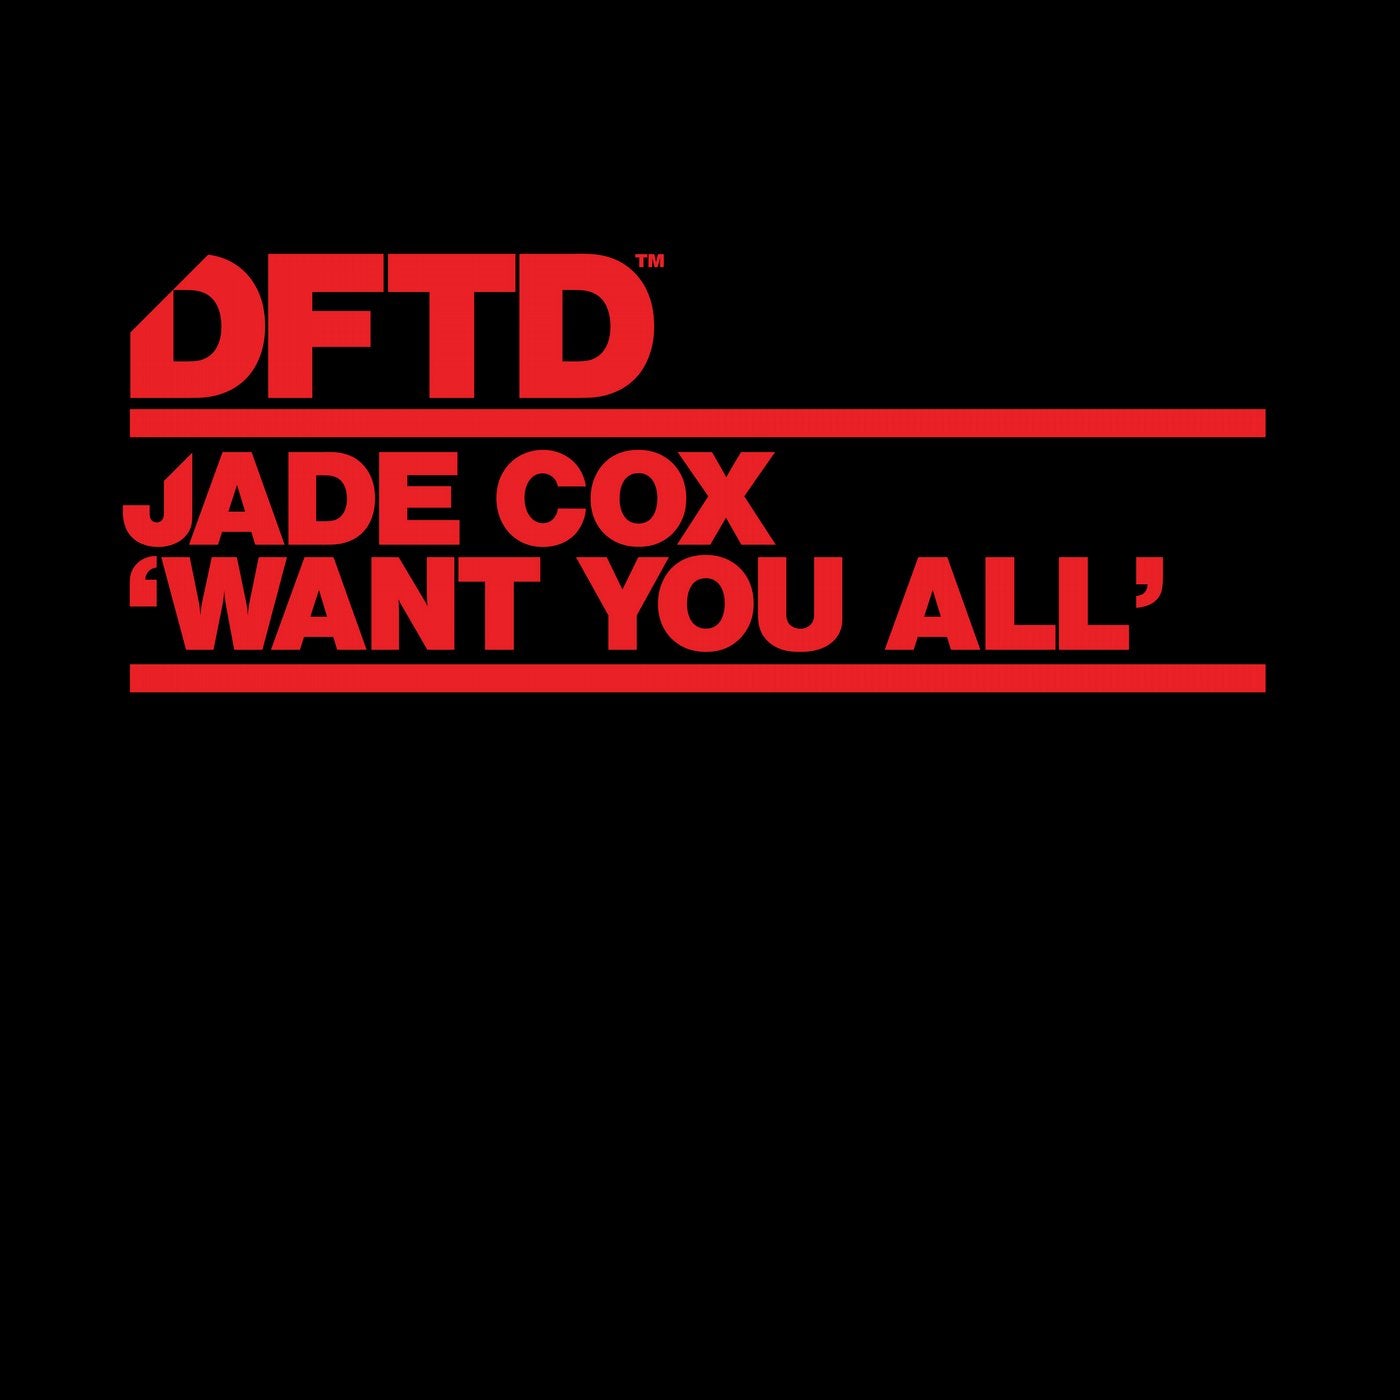 Want You All - Extended Mixes